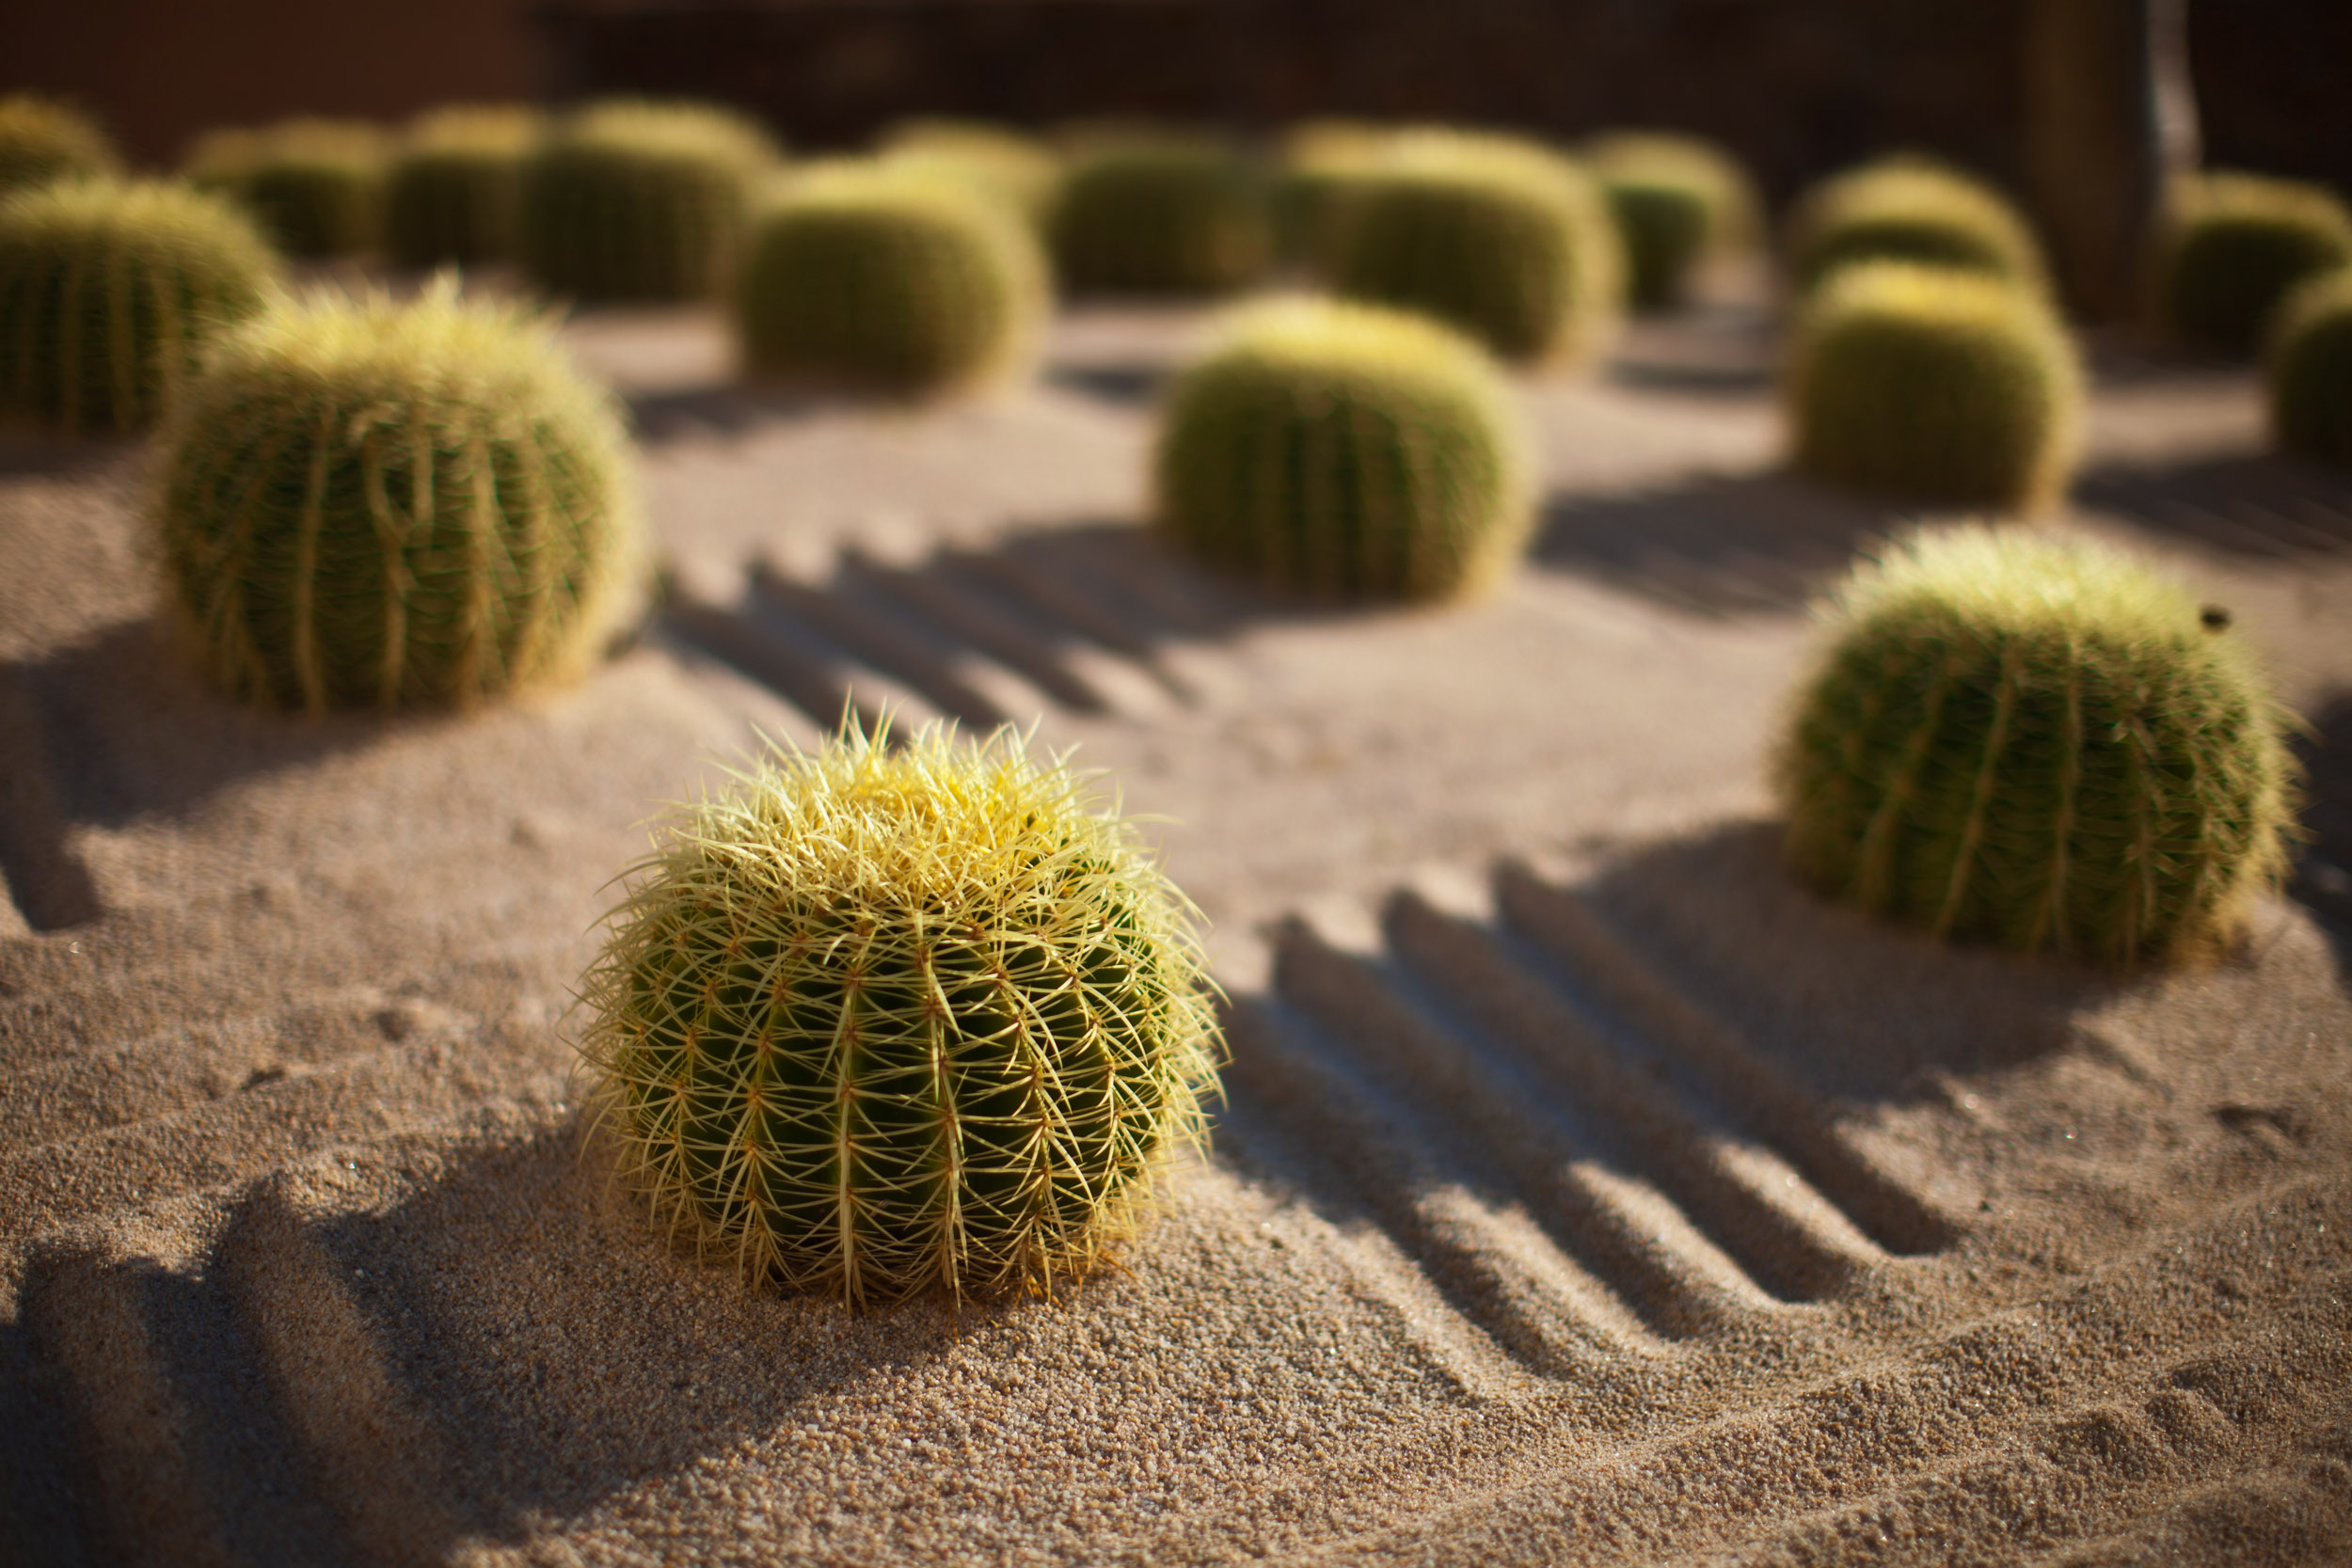 Squat cacti line up in formation to greet passing guests